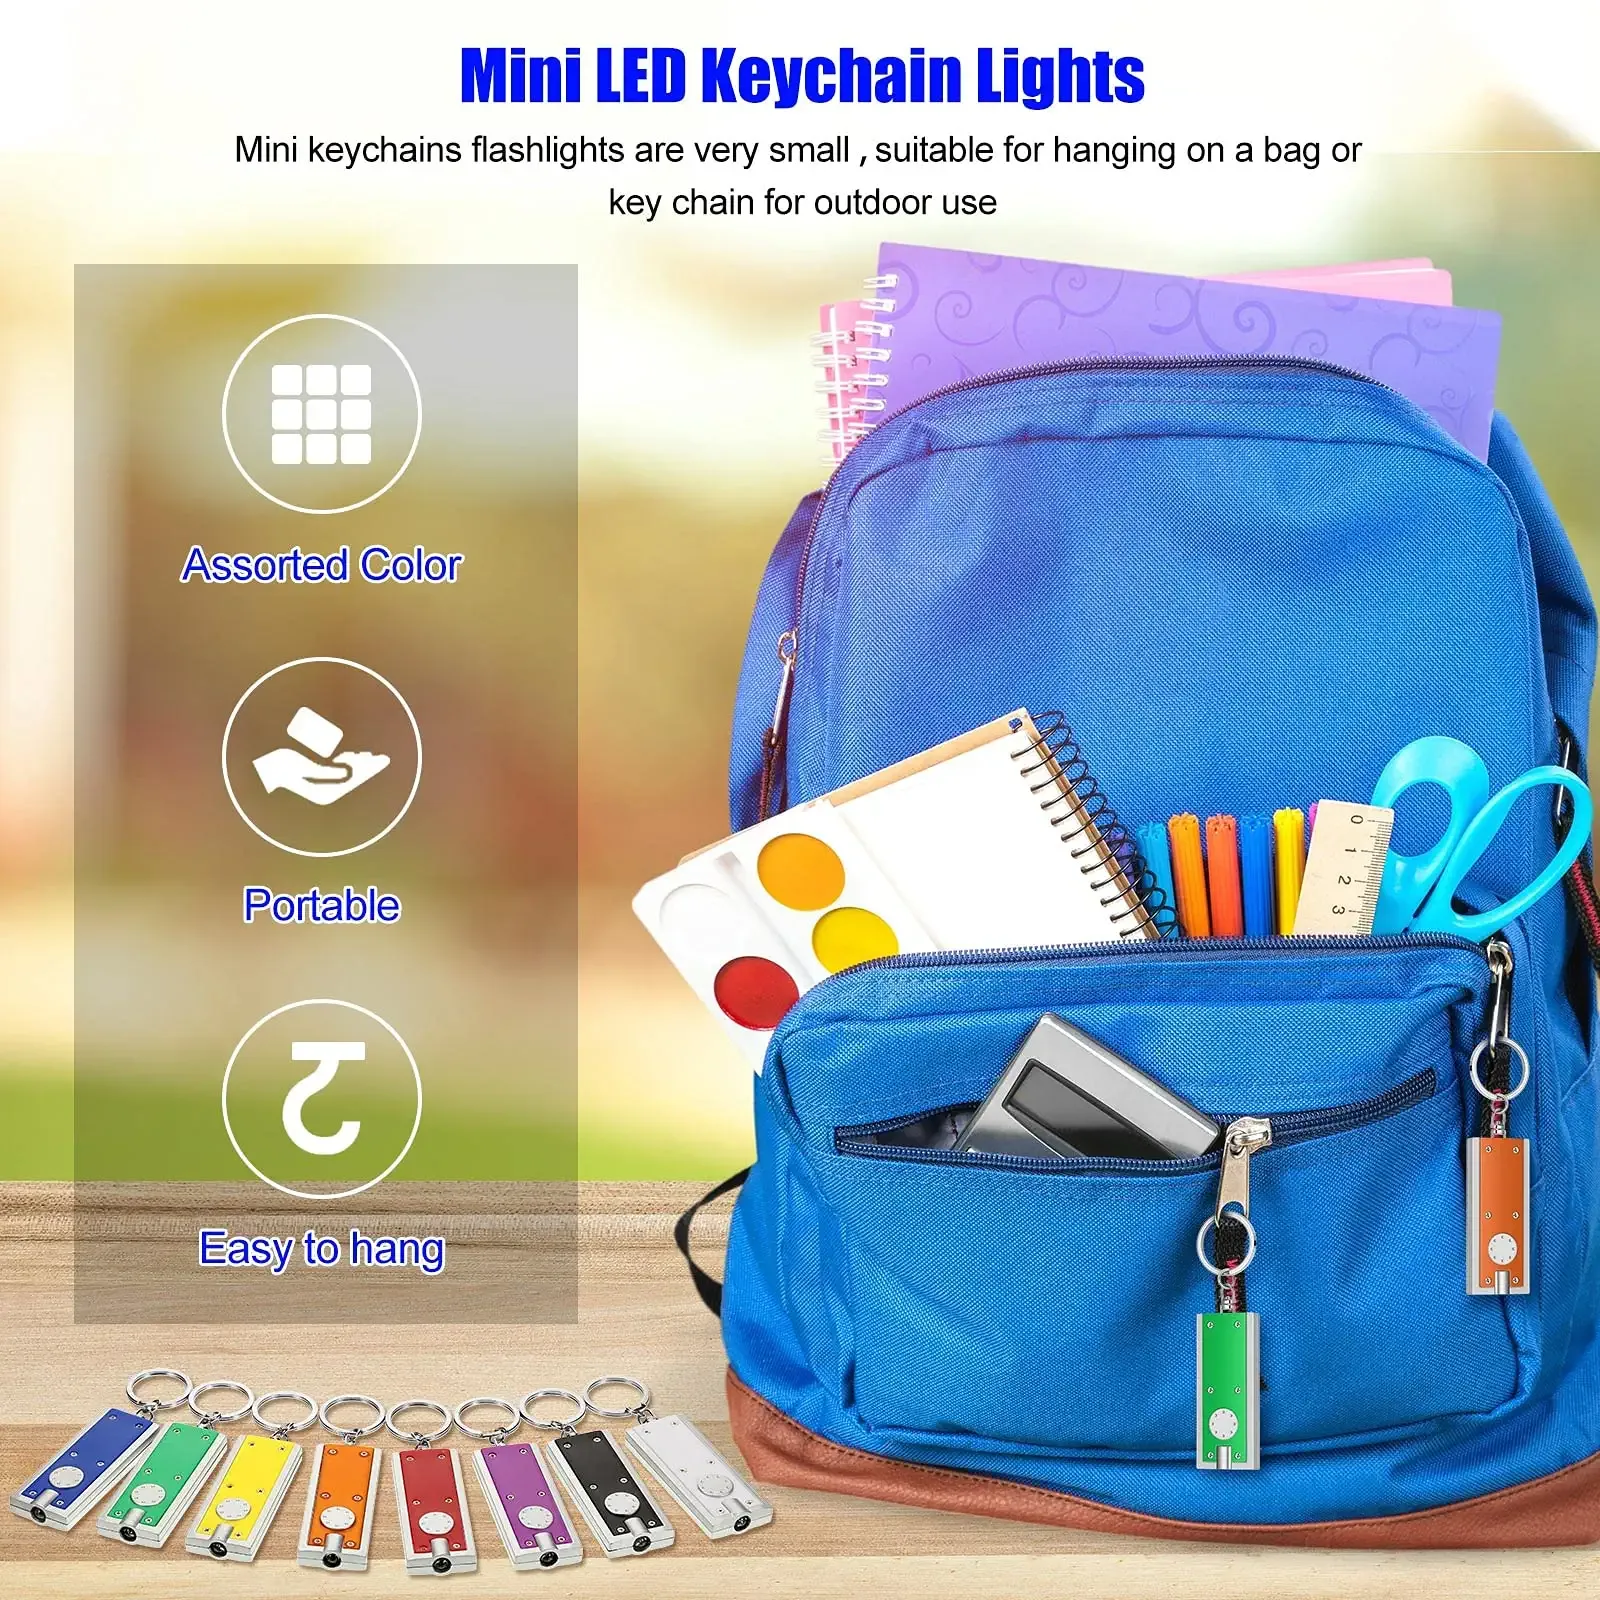 mini keychain led lights keychains flashlight assorted color ultra bright flashlight portable key chain flash light torch key ring powerful keychain lights for outdoor camping activity